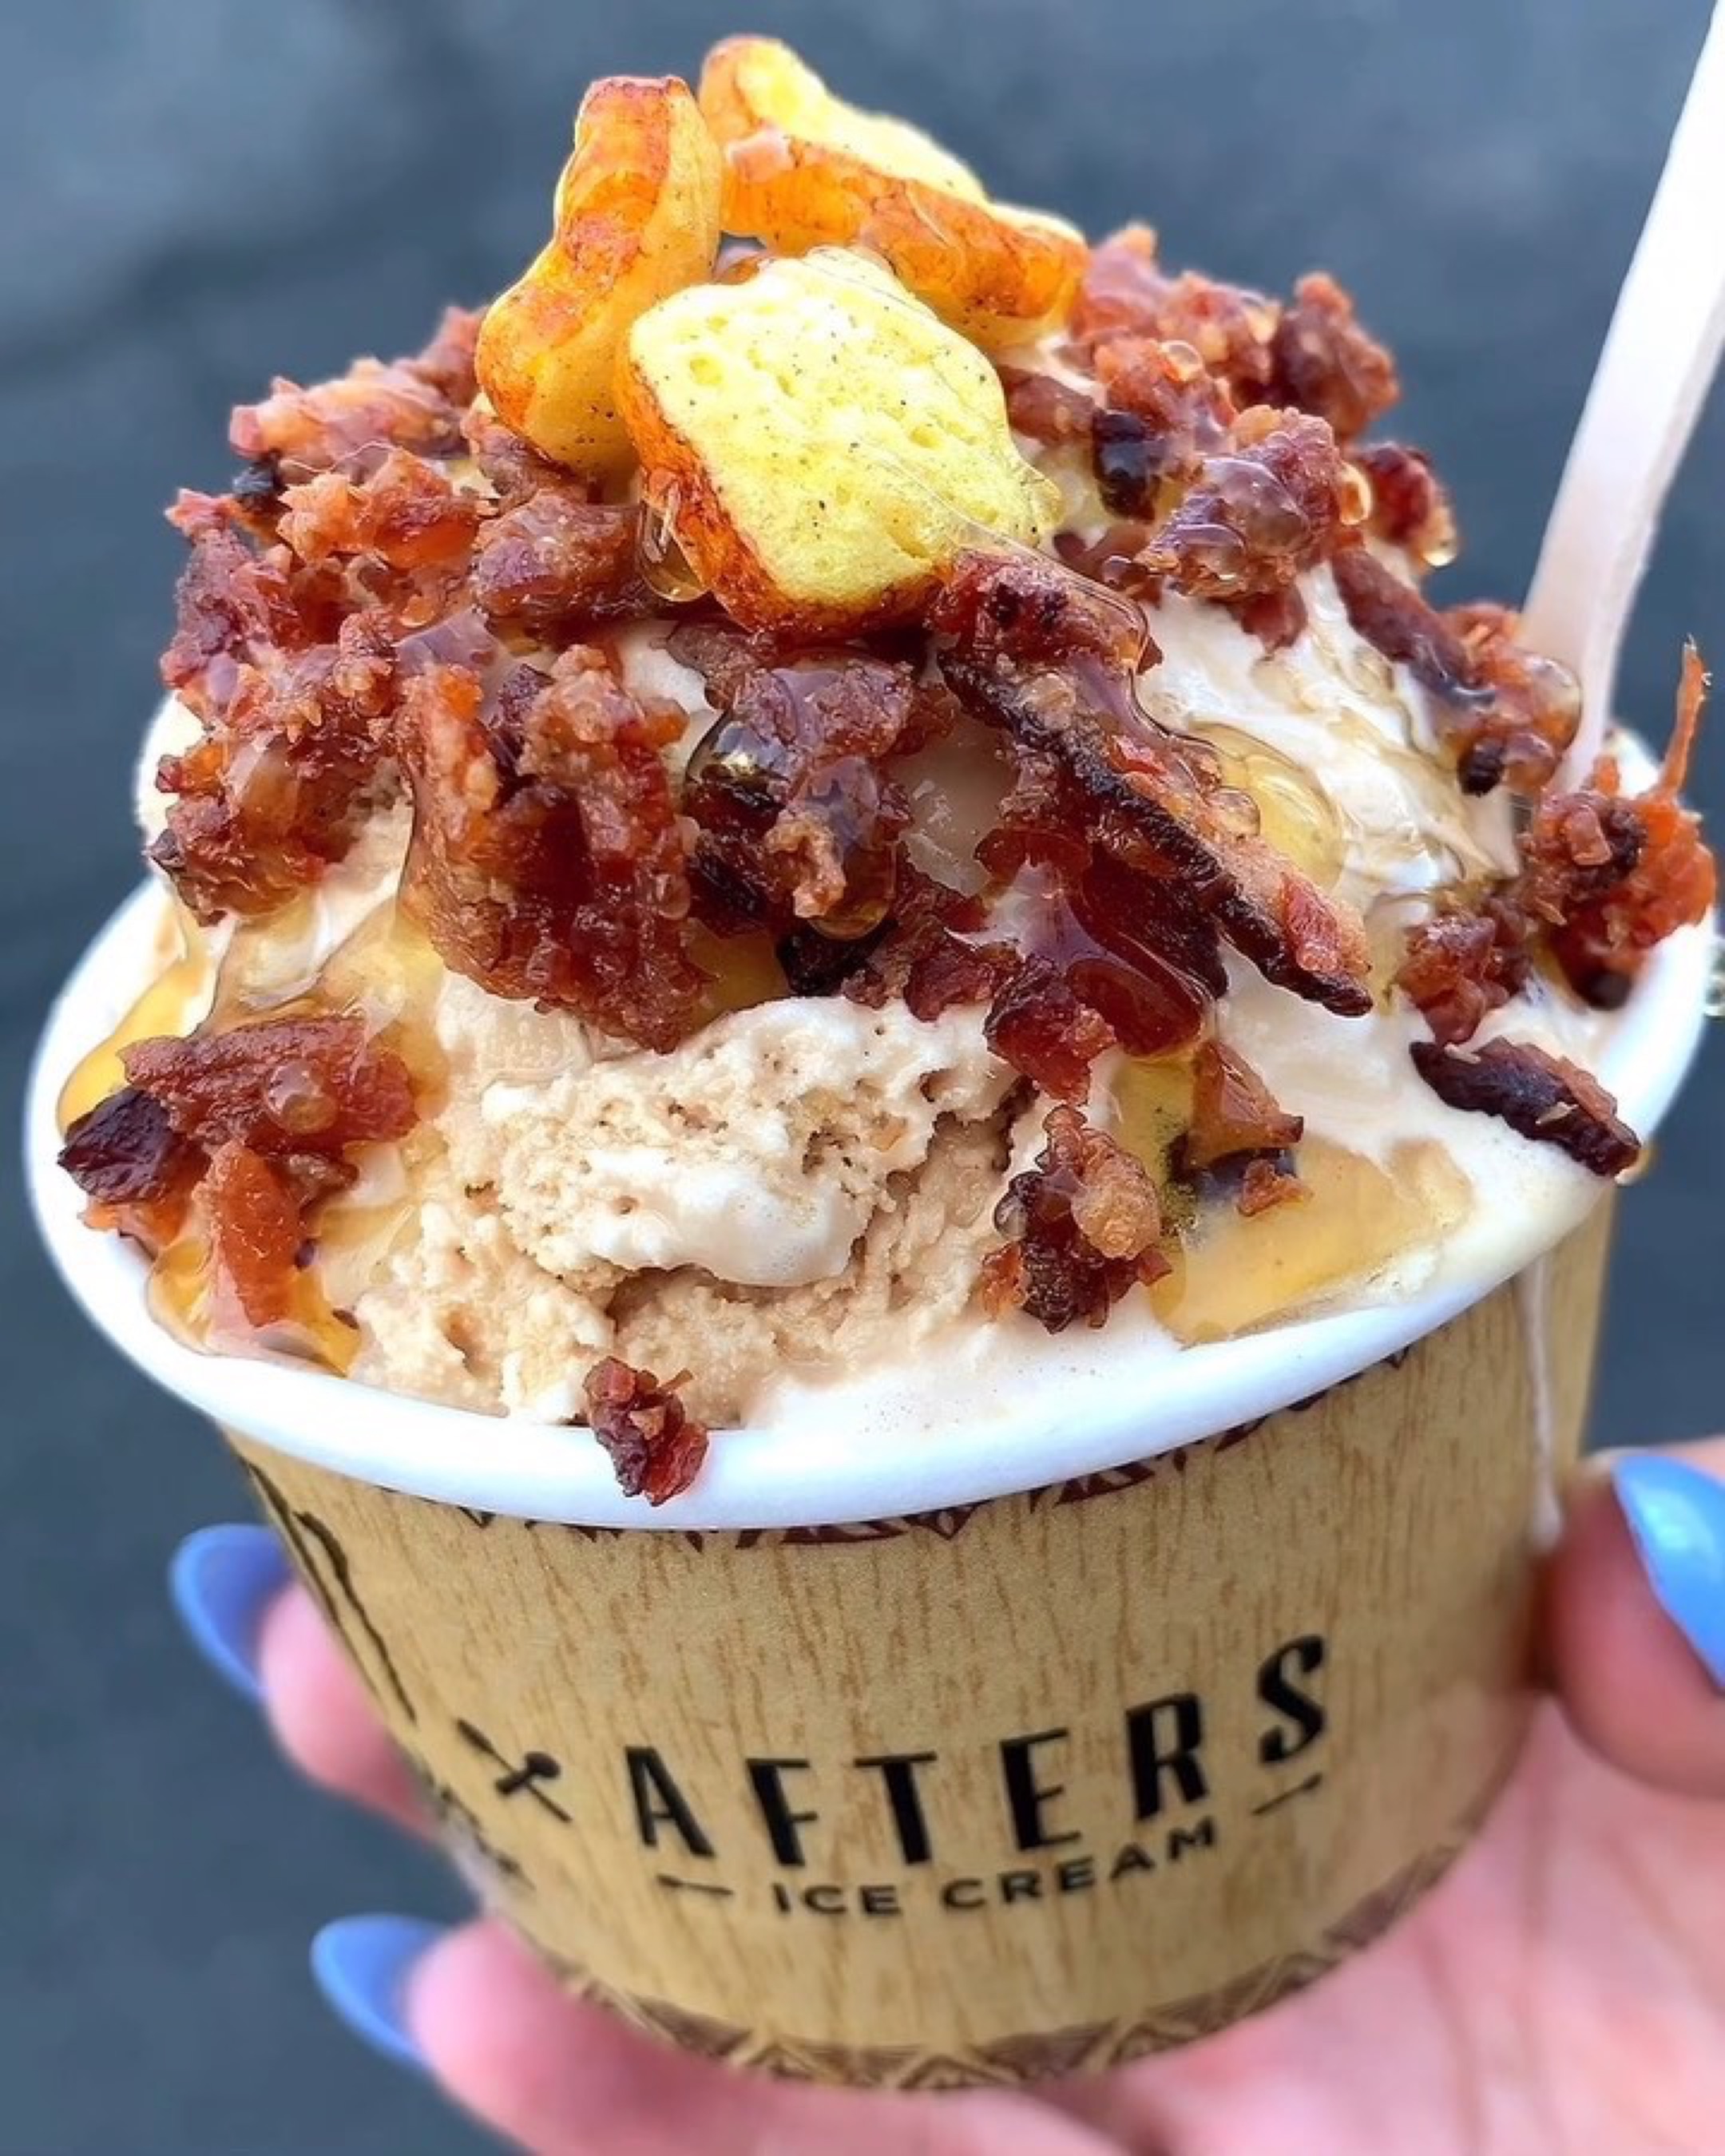 afters ice cream